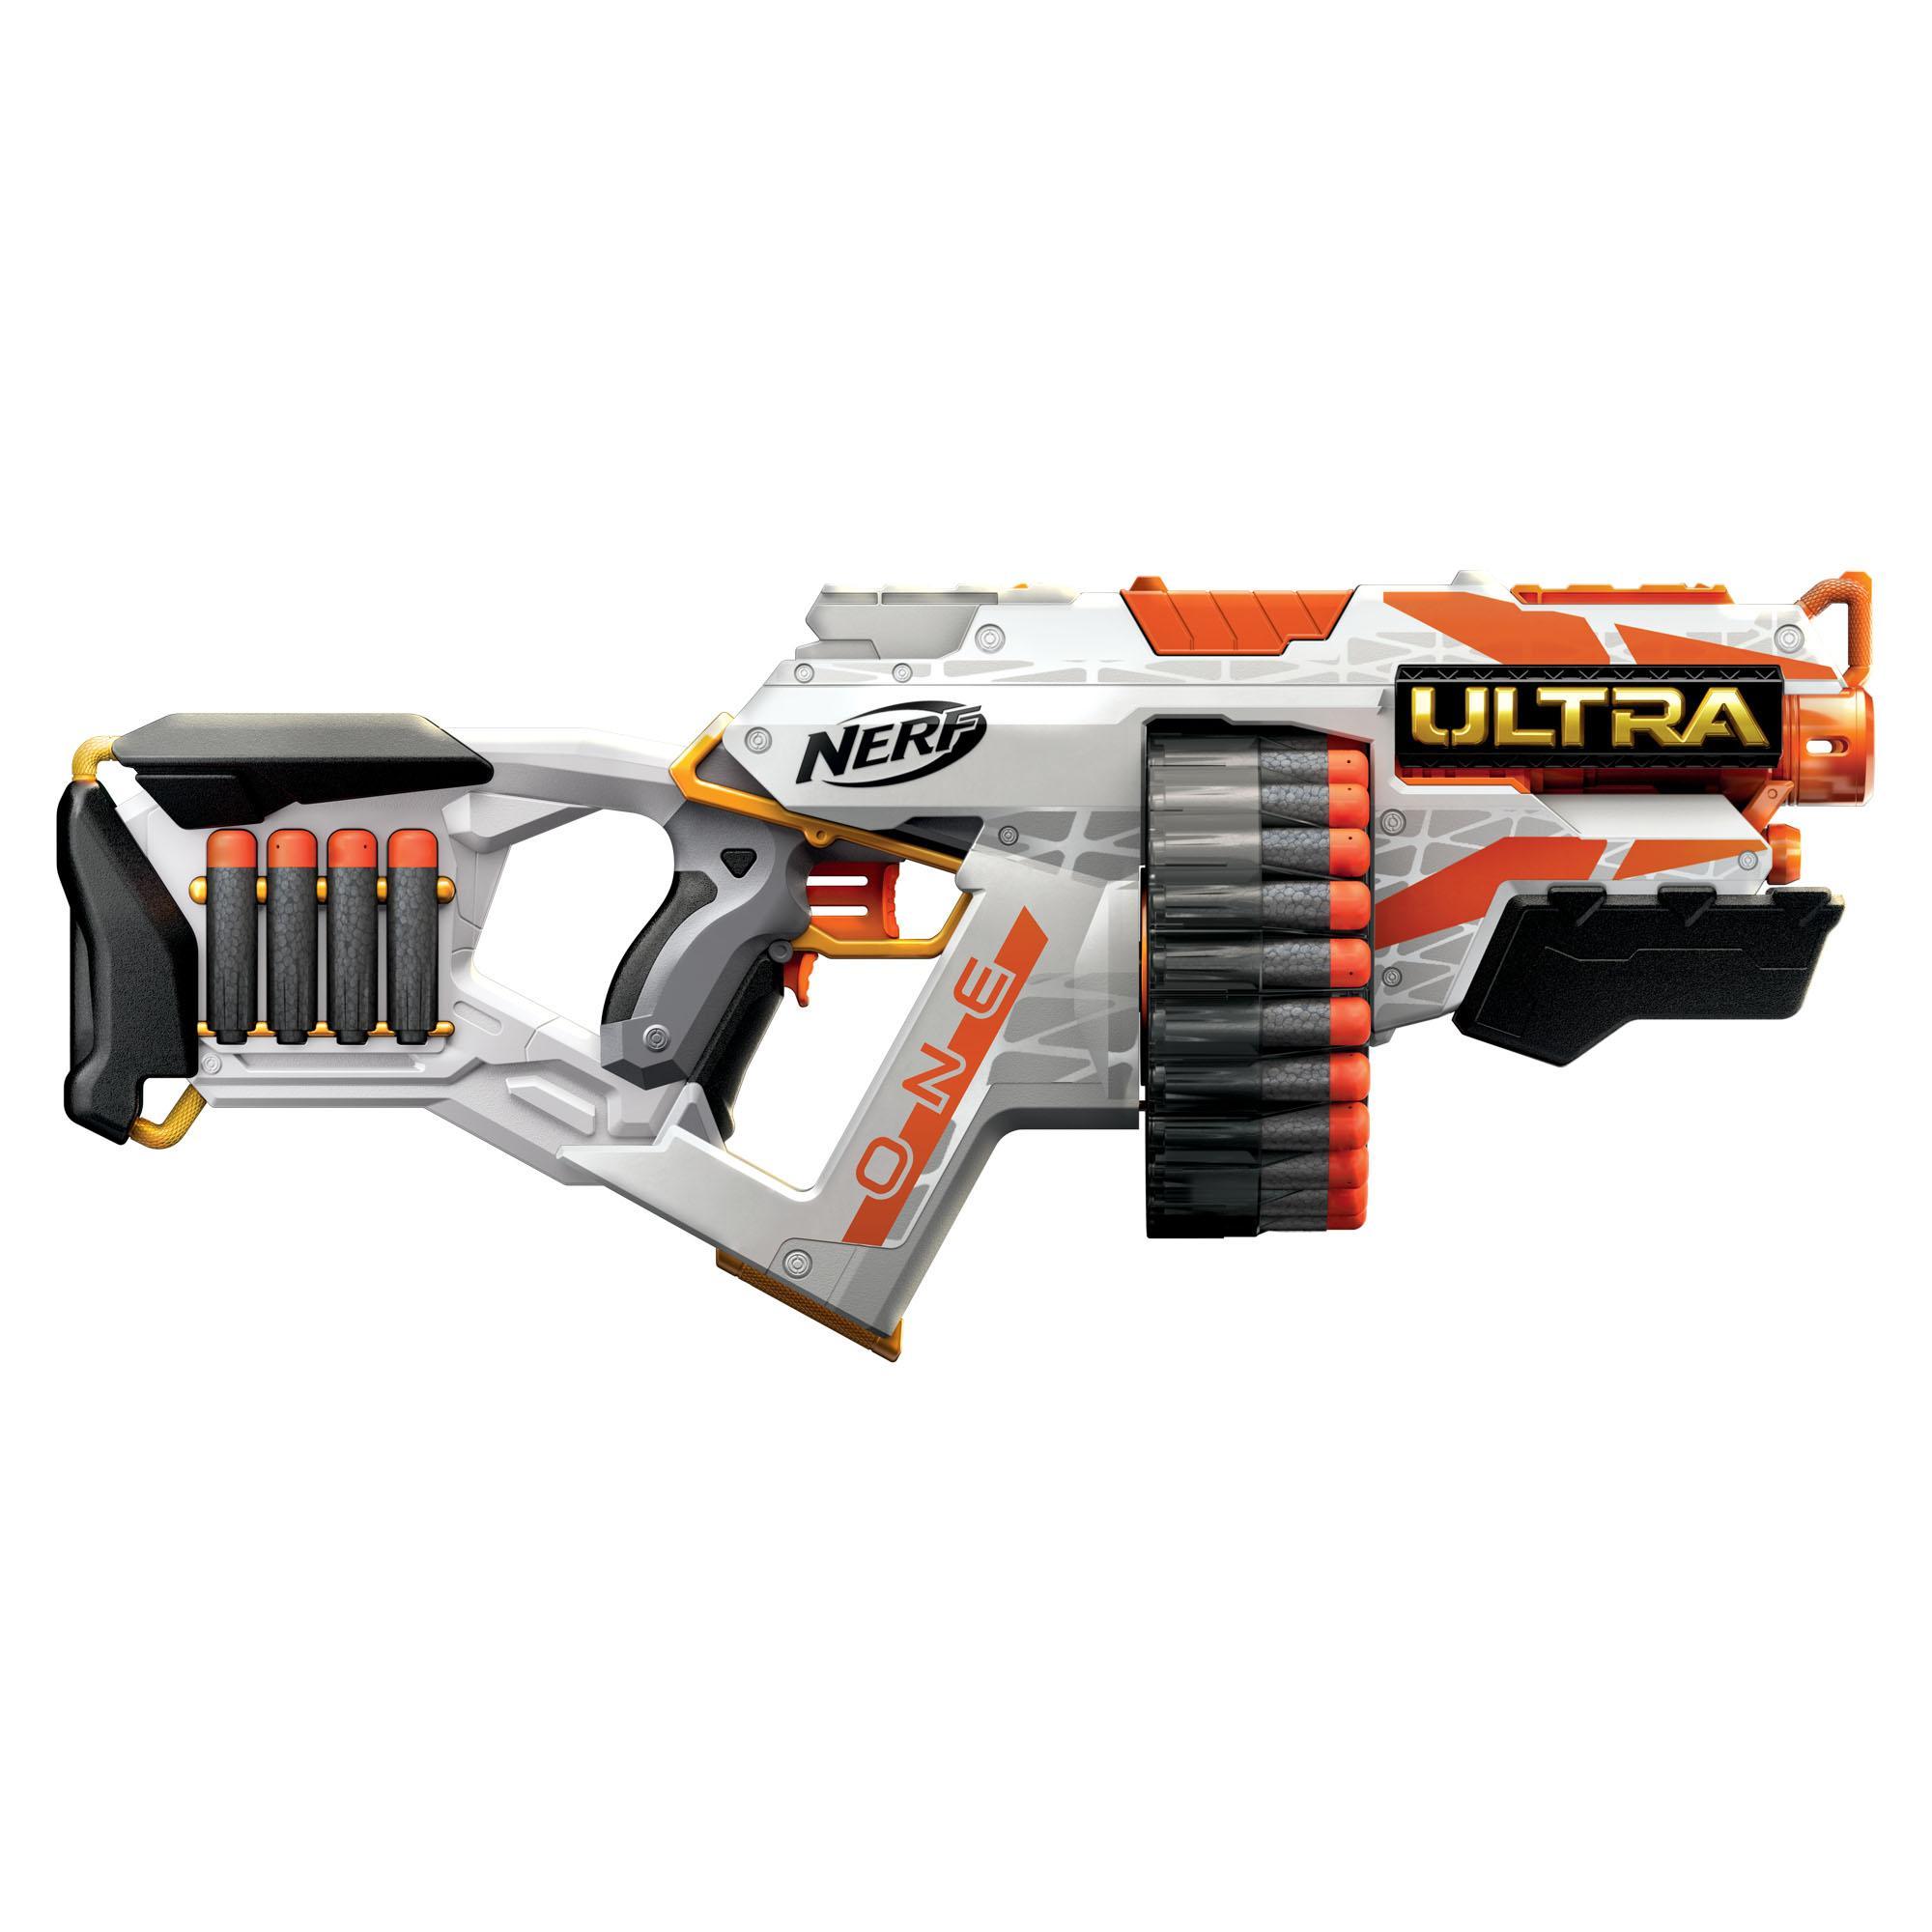 Nerf Ultra One Motorized Blaster -- High Capacity Drum -- 25 Official Nerf Ultra Darts, the Farthest Flying Nerf Darts product thumbnail 1